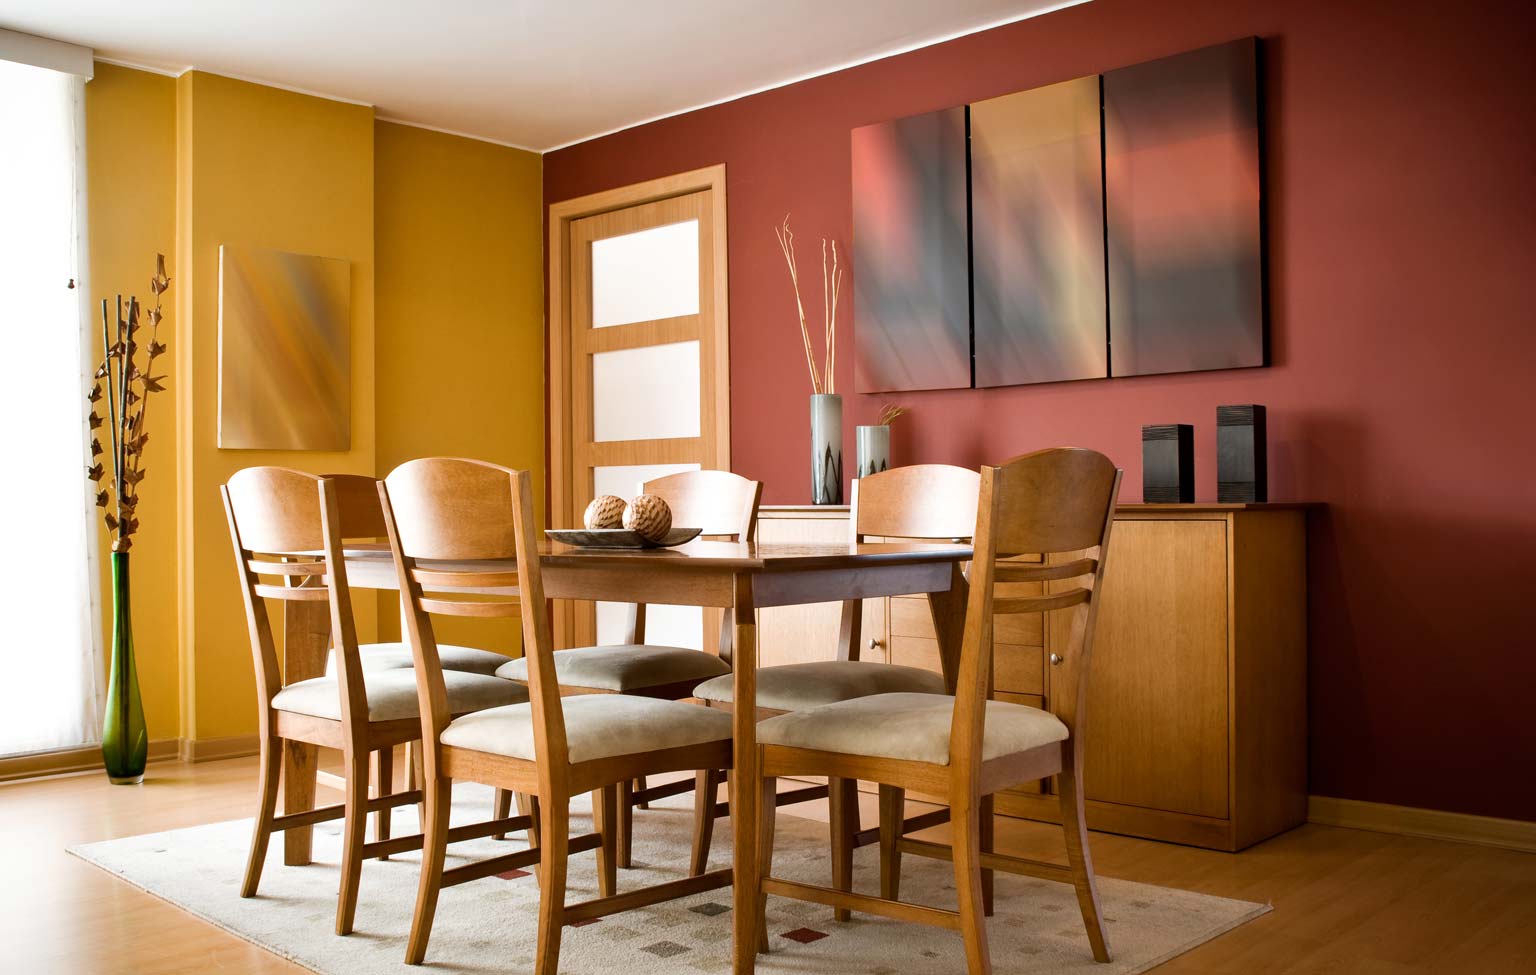 Dining Room Color Ideas: 16 Paint Inspiration Shades